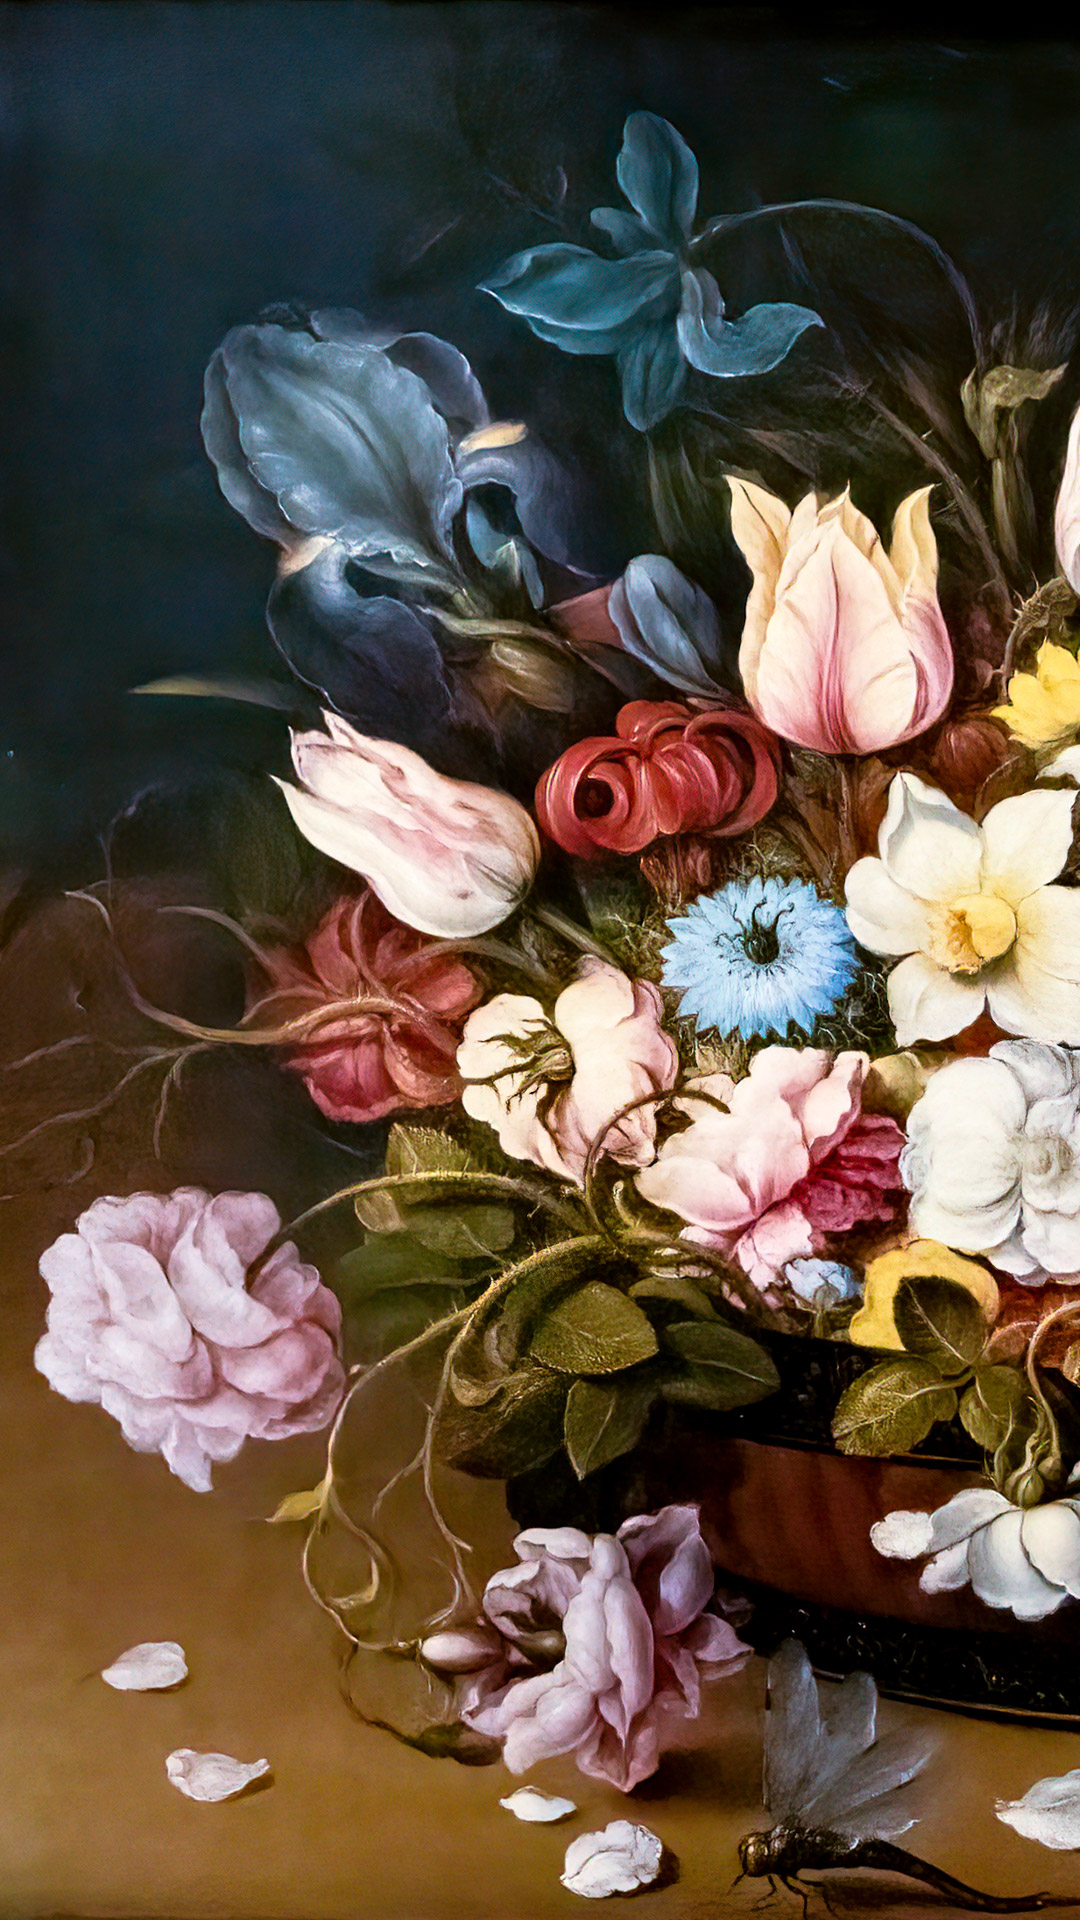 Transform your smartphone with the exquisite flowers art of Beert, available for free in high resolution.